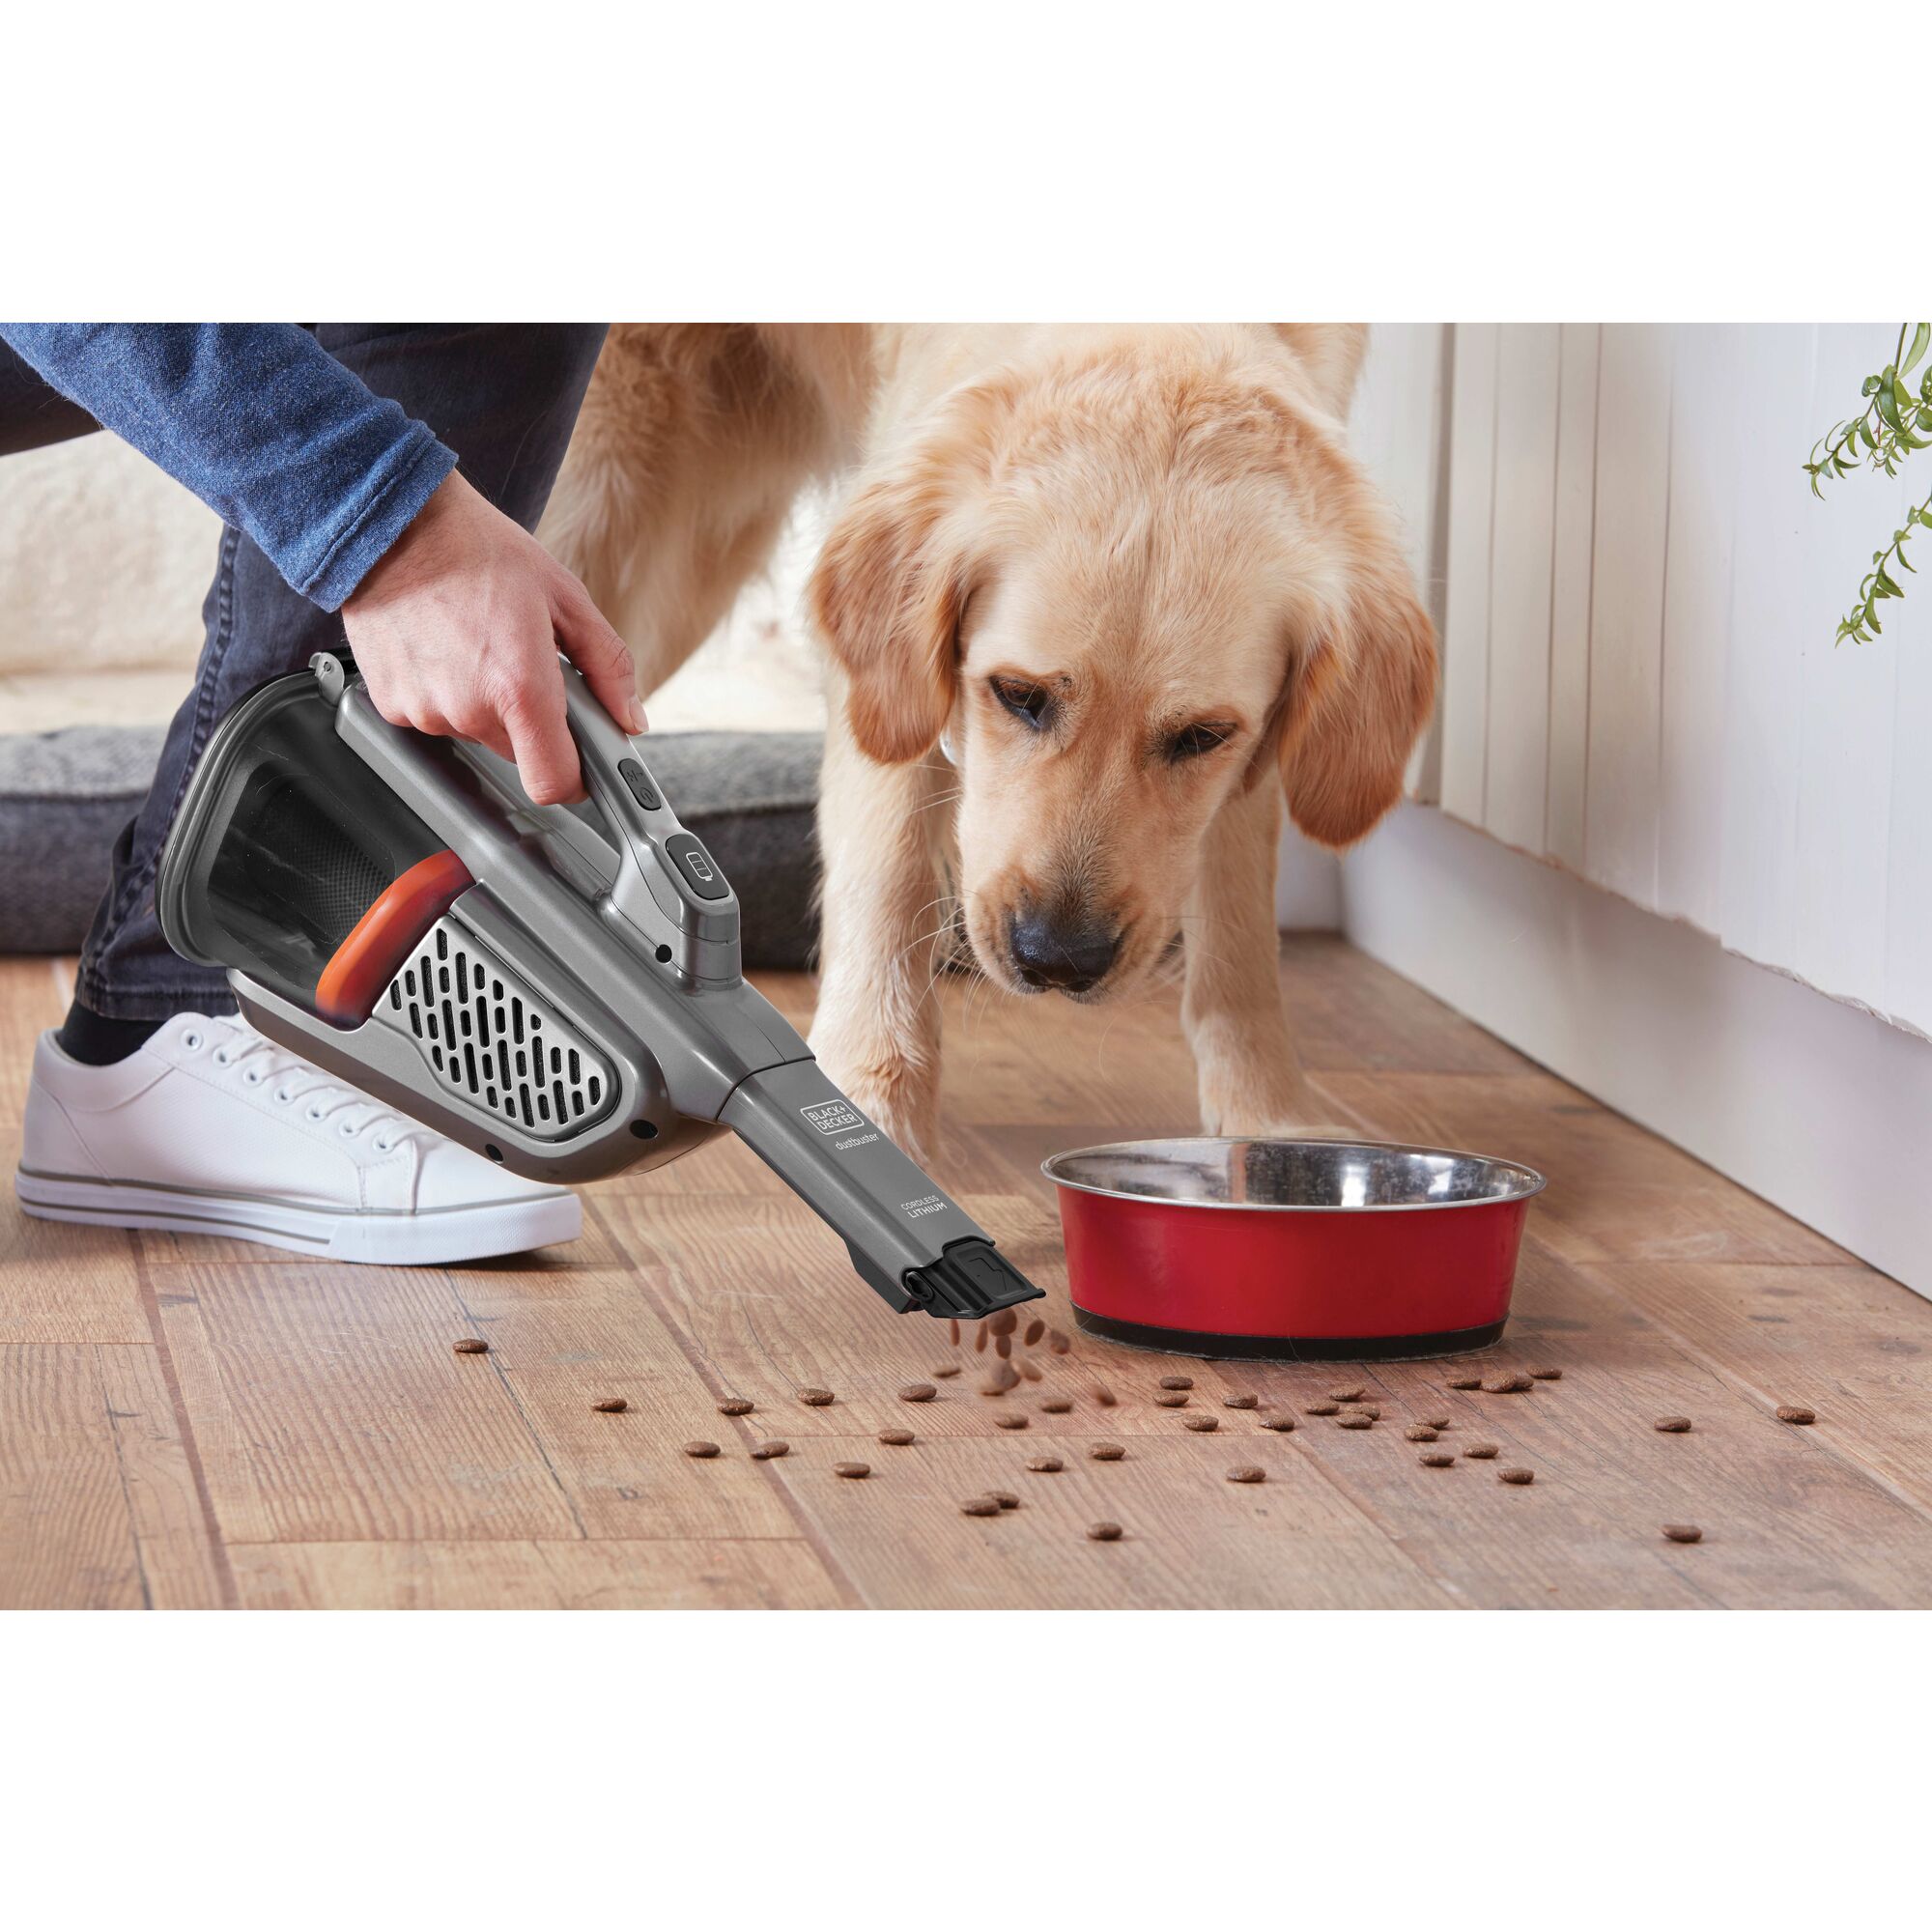 12 volt MAX dustbuster AdvancedClean cordless hand vacuum being used by a person to clean dog food spillage.